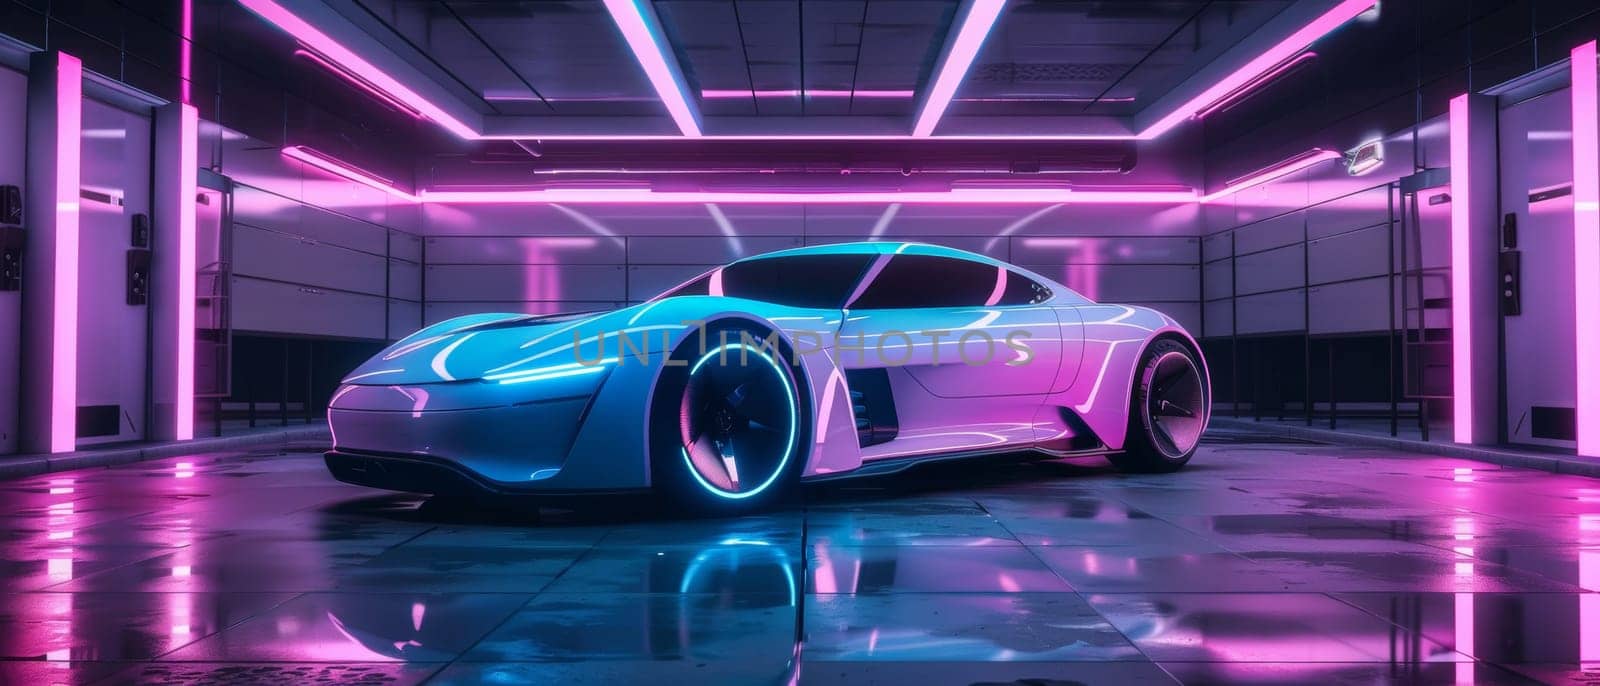 This electric car boasts a futuristic silhouette lit by cyber neon accents, casting reflections on the glossy floor. Its design merges efficiency with a cyber aesthetic, hinting at the next era